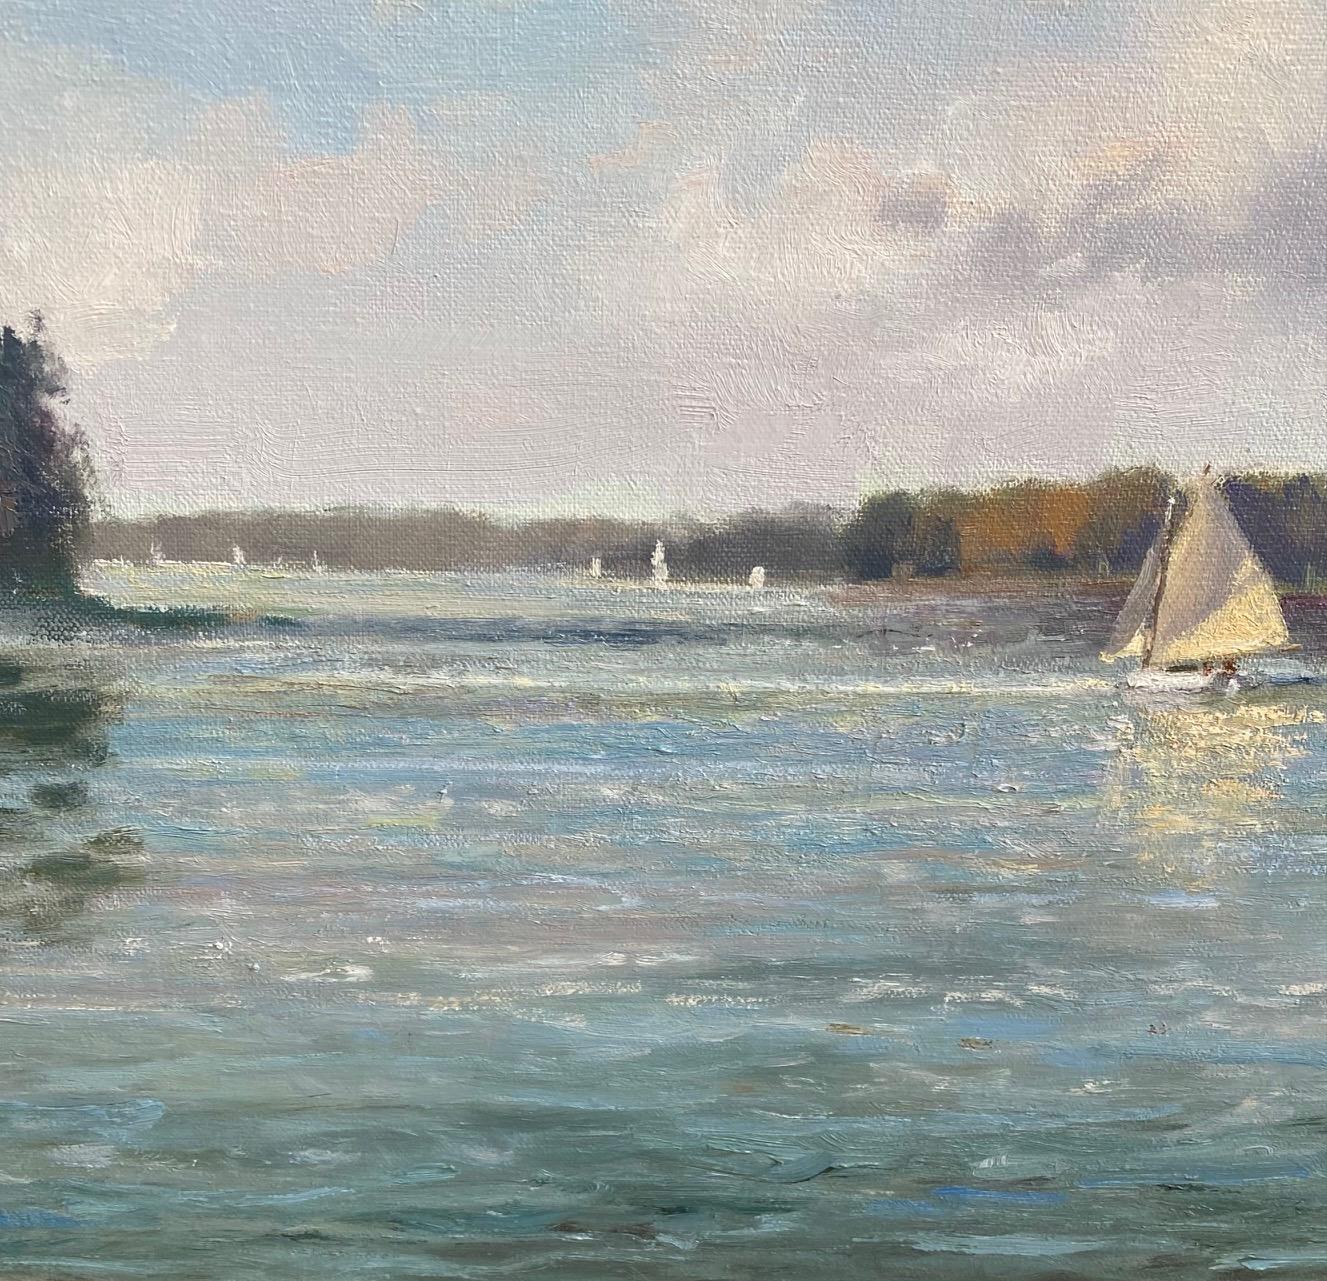 In an instant your sail catches the wind and your relaxing day under sail becomes an invigorating trip immersed in the soothing aquamarine waters and skies of Martha's Vineyard.  This boat scene is further enhanced by impressionist texture and